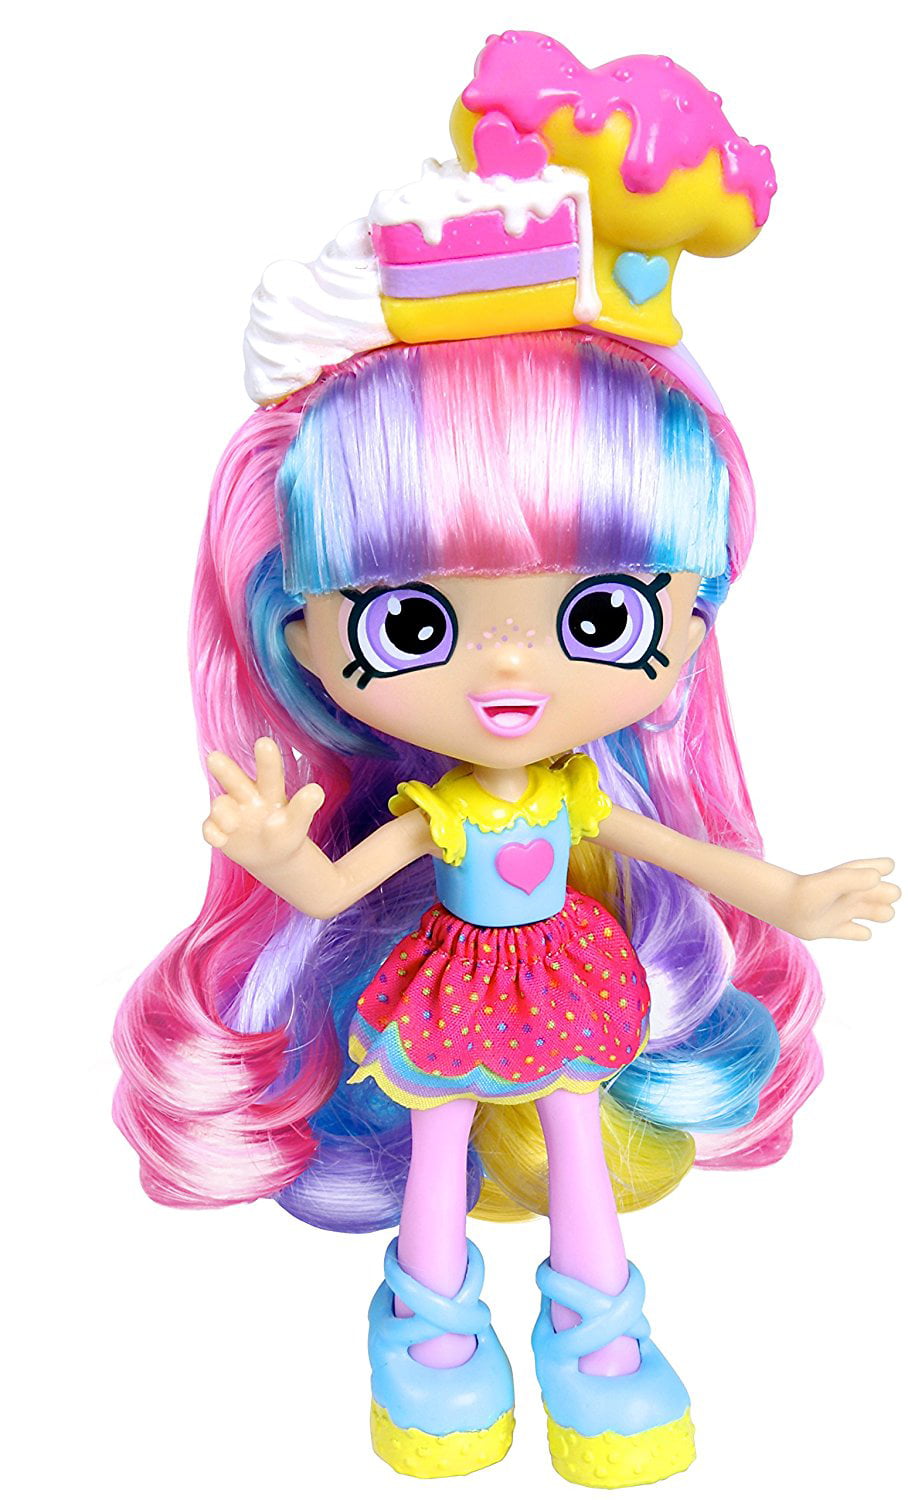 SHOPKINS SHOPPIES PAM CAKE INCLUDES 2 EXCLUSIVE SHOPKINS BRAND NEW * 